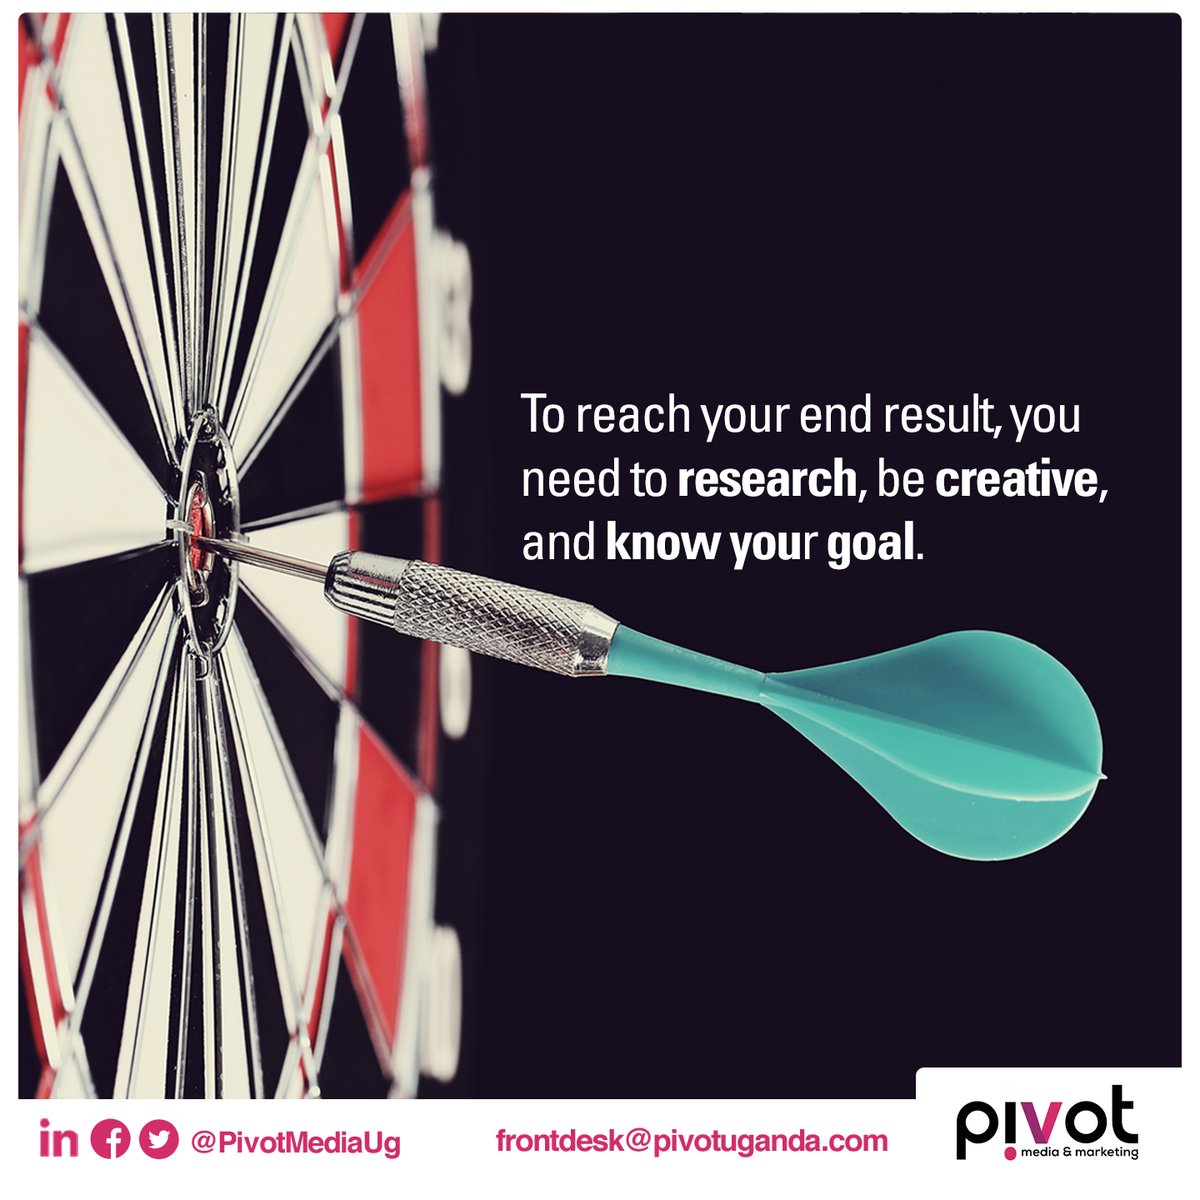 Whether your goal is to profit, or grow, it is important to understand that behind your company’s success is a good communication team.

Let’s discuss your brand’s marketing and communication needs.
#Pivotpr
#MondayTip